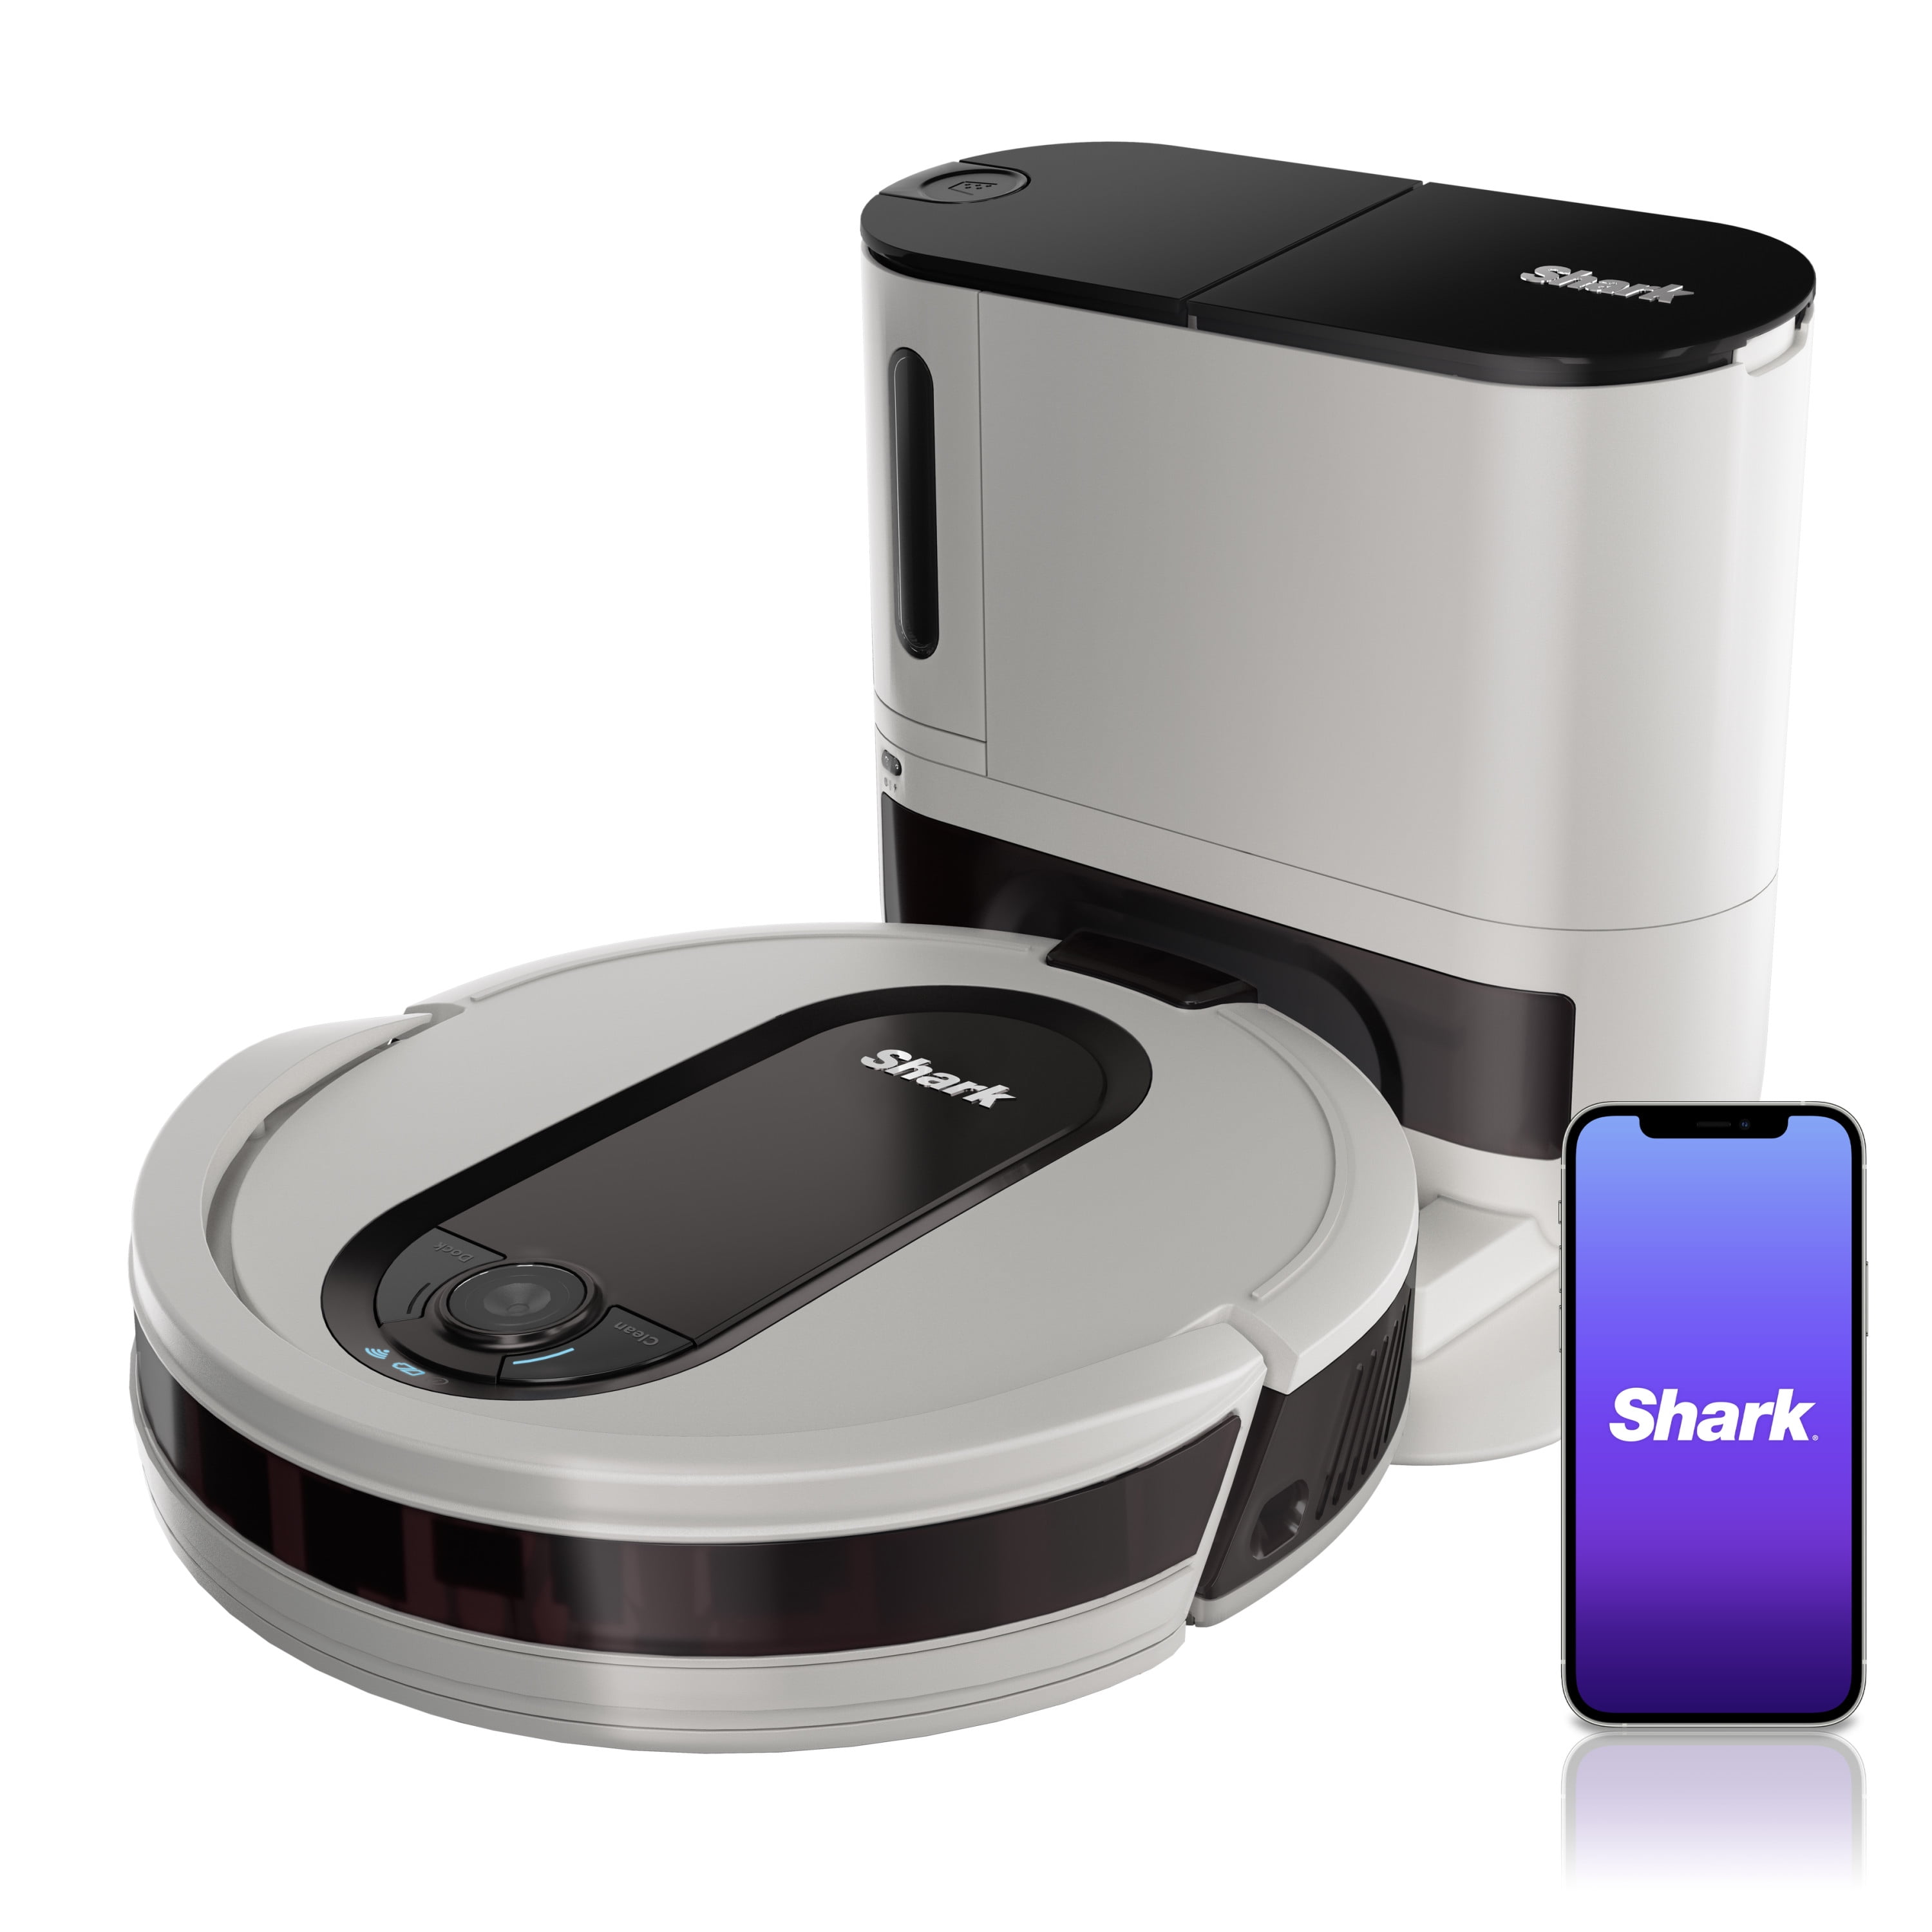 Details about   Shark IQ RV1001AE Robot Self-Empty XL Vacuum Wi-Fi Alexa Enabled Free Shpping 